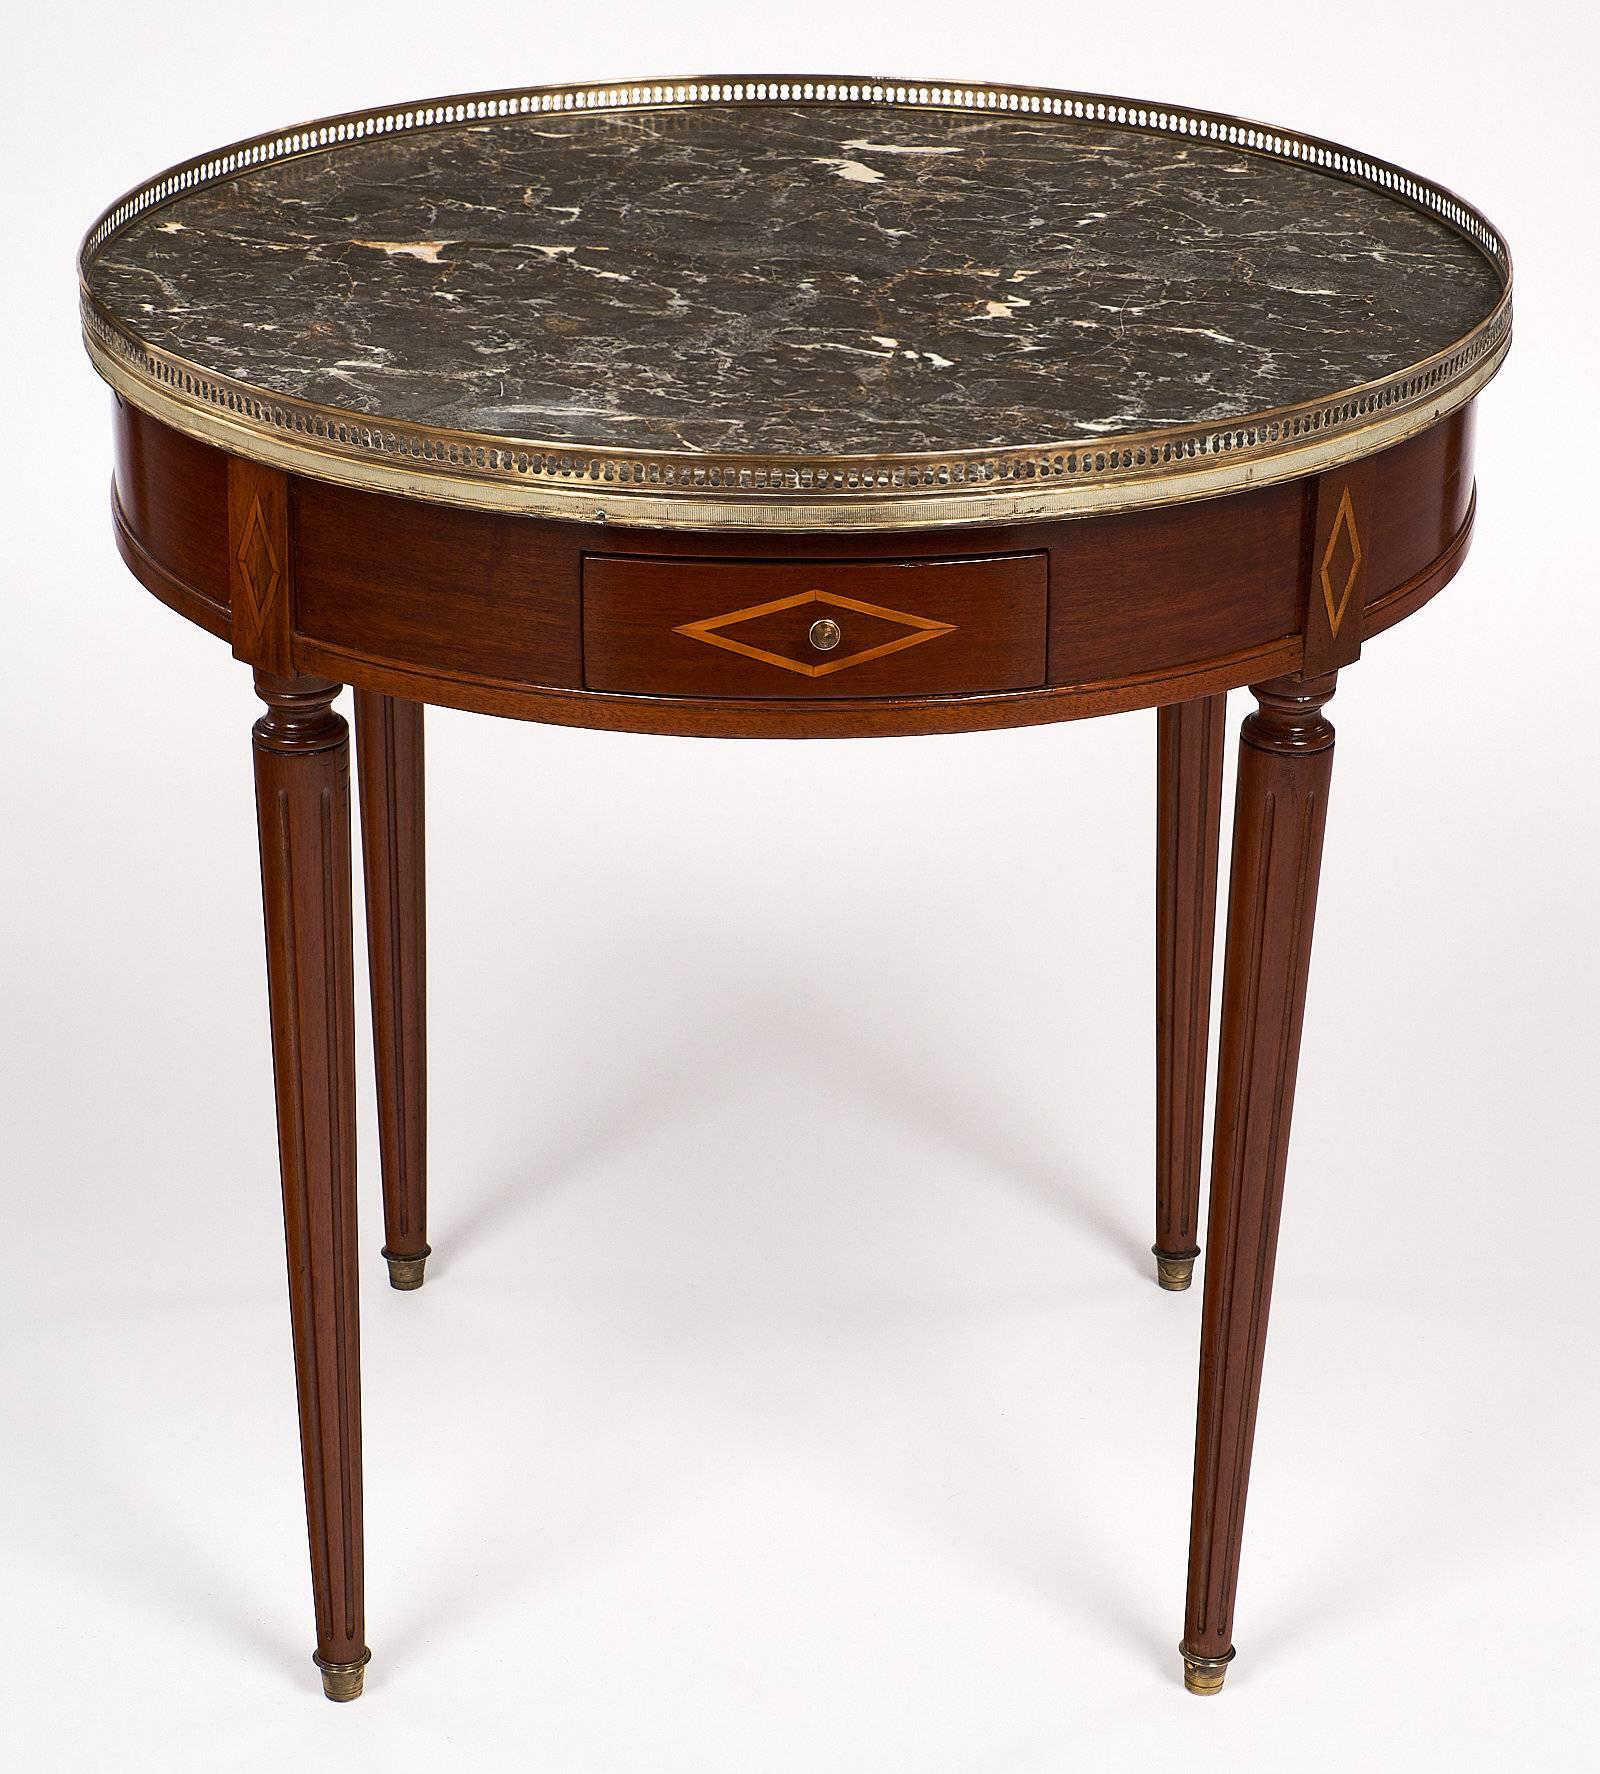 Antique Louis XVI style bouillotte table with a beautiful Sainte Anne marble top, pull out leaves and drawers. This elegant table made of mahogany, features diamond shaped inlays. There is a brass gallery that draws the eye to the table, and all